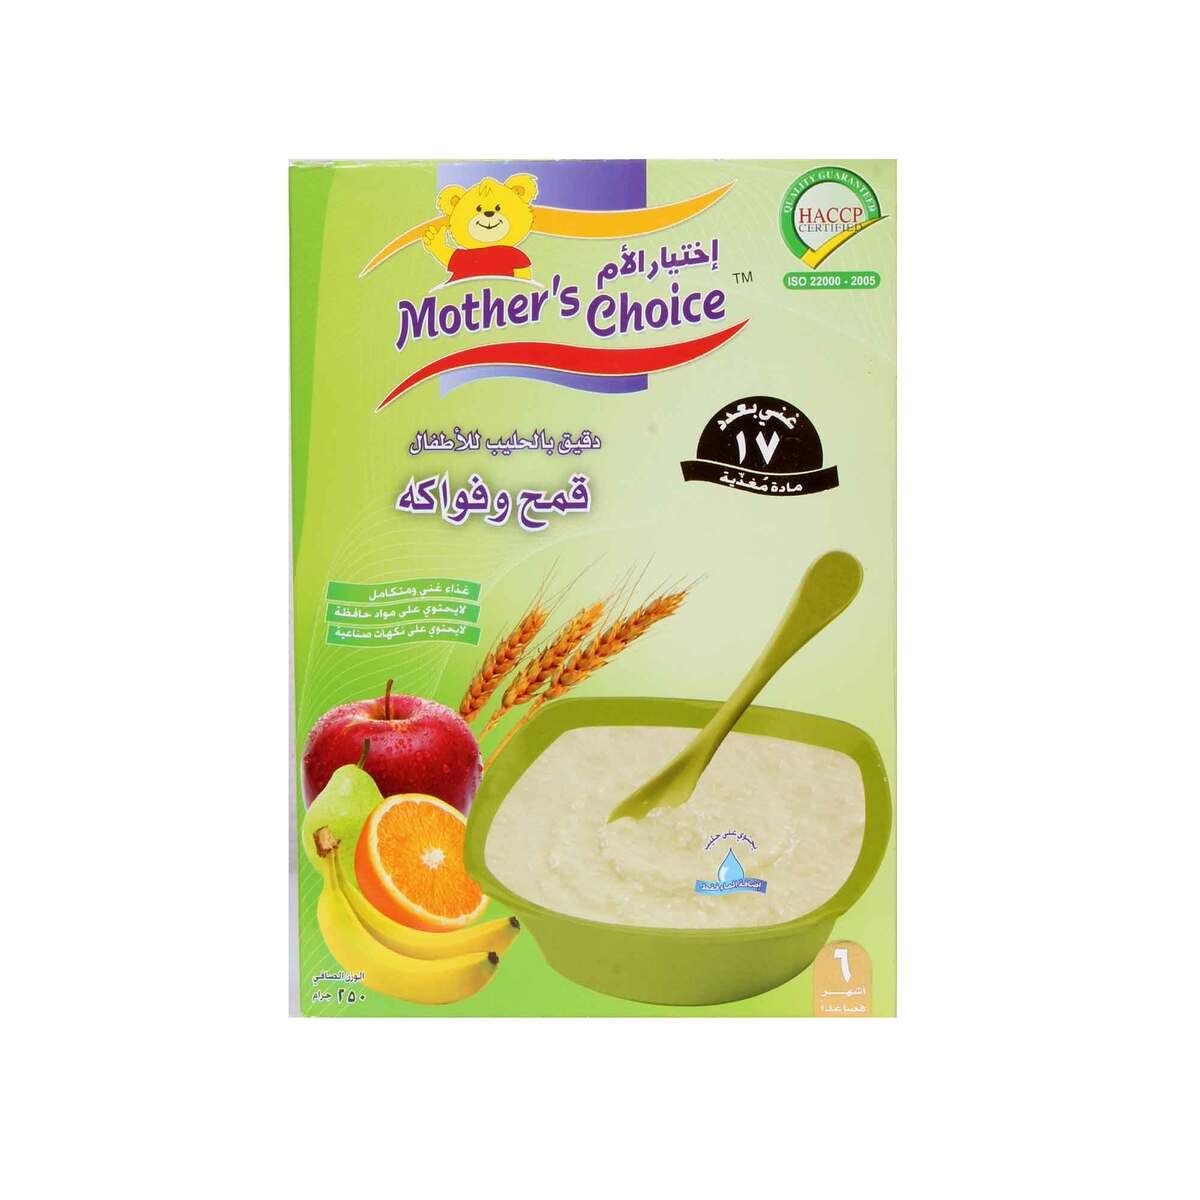 Mother's Choice Baby  Wheat & Fruits Cereal With Milk 6 Months Onwards 250g